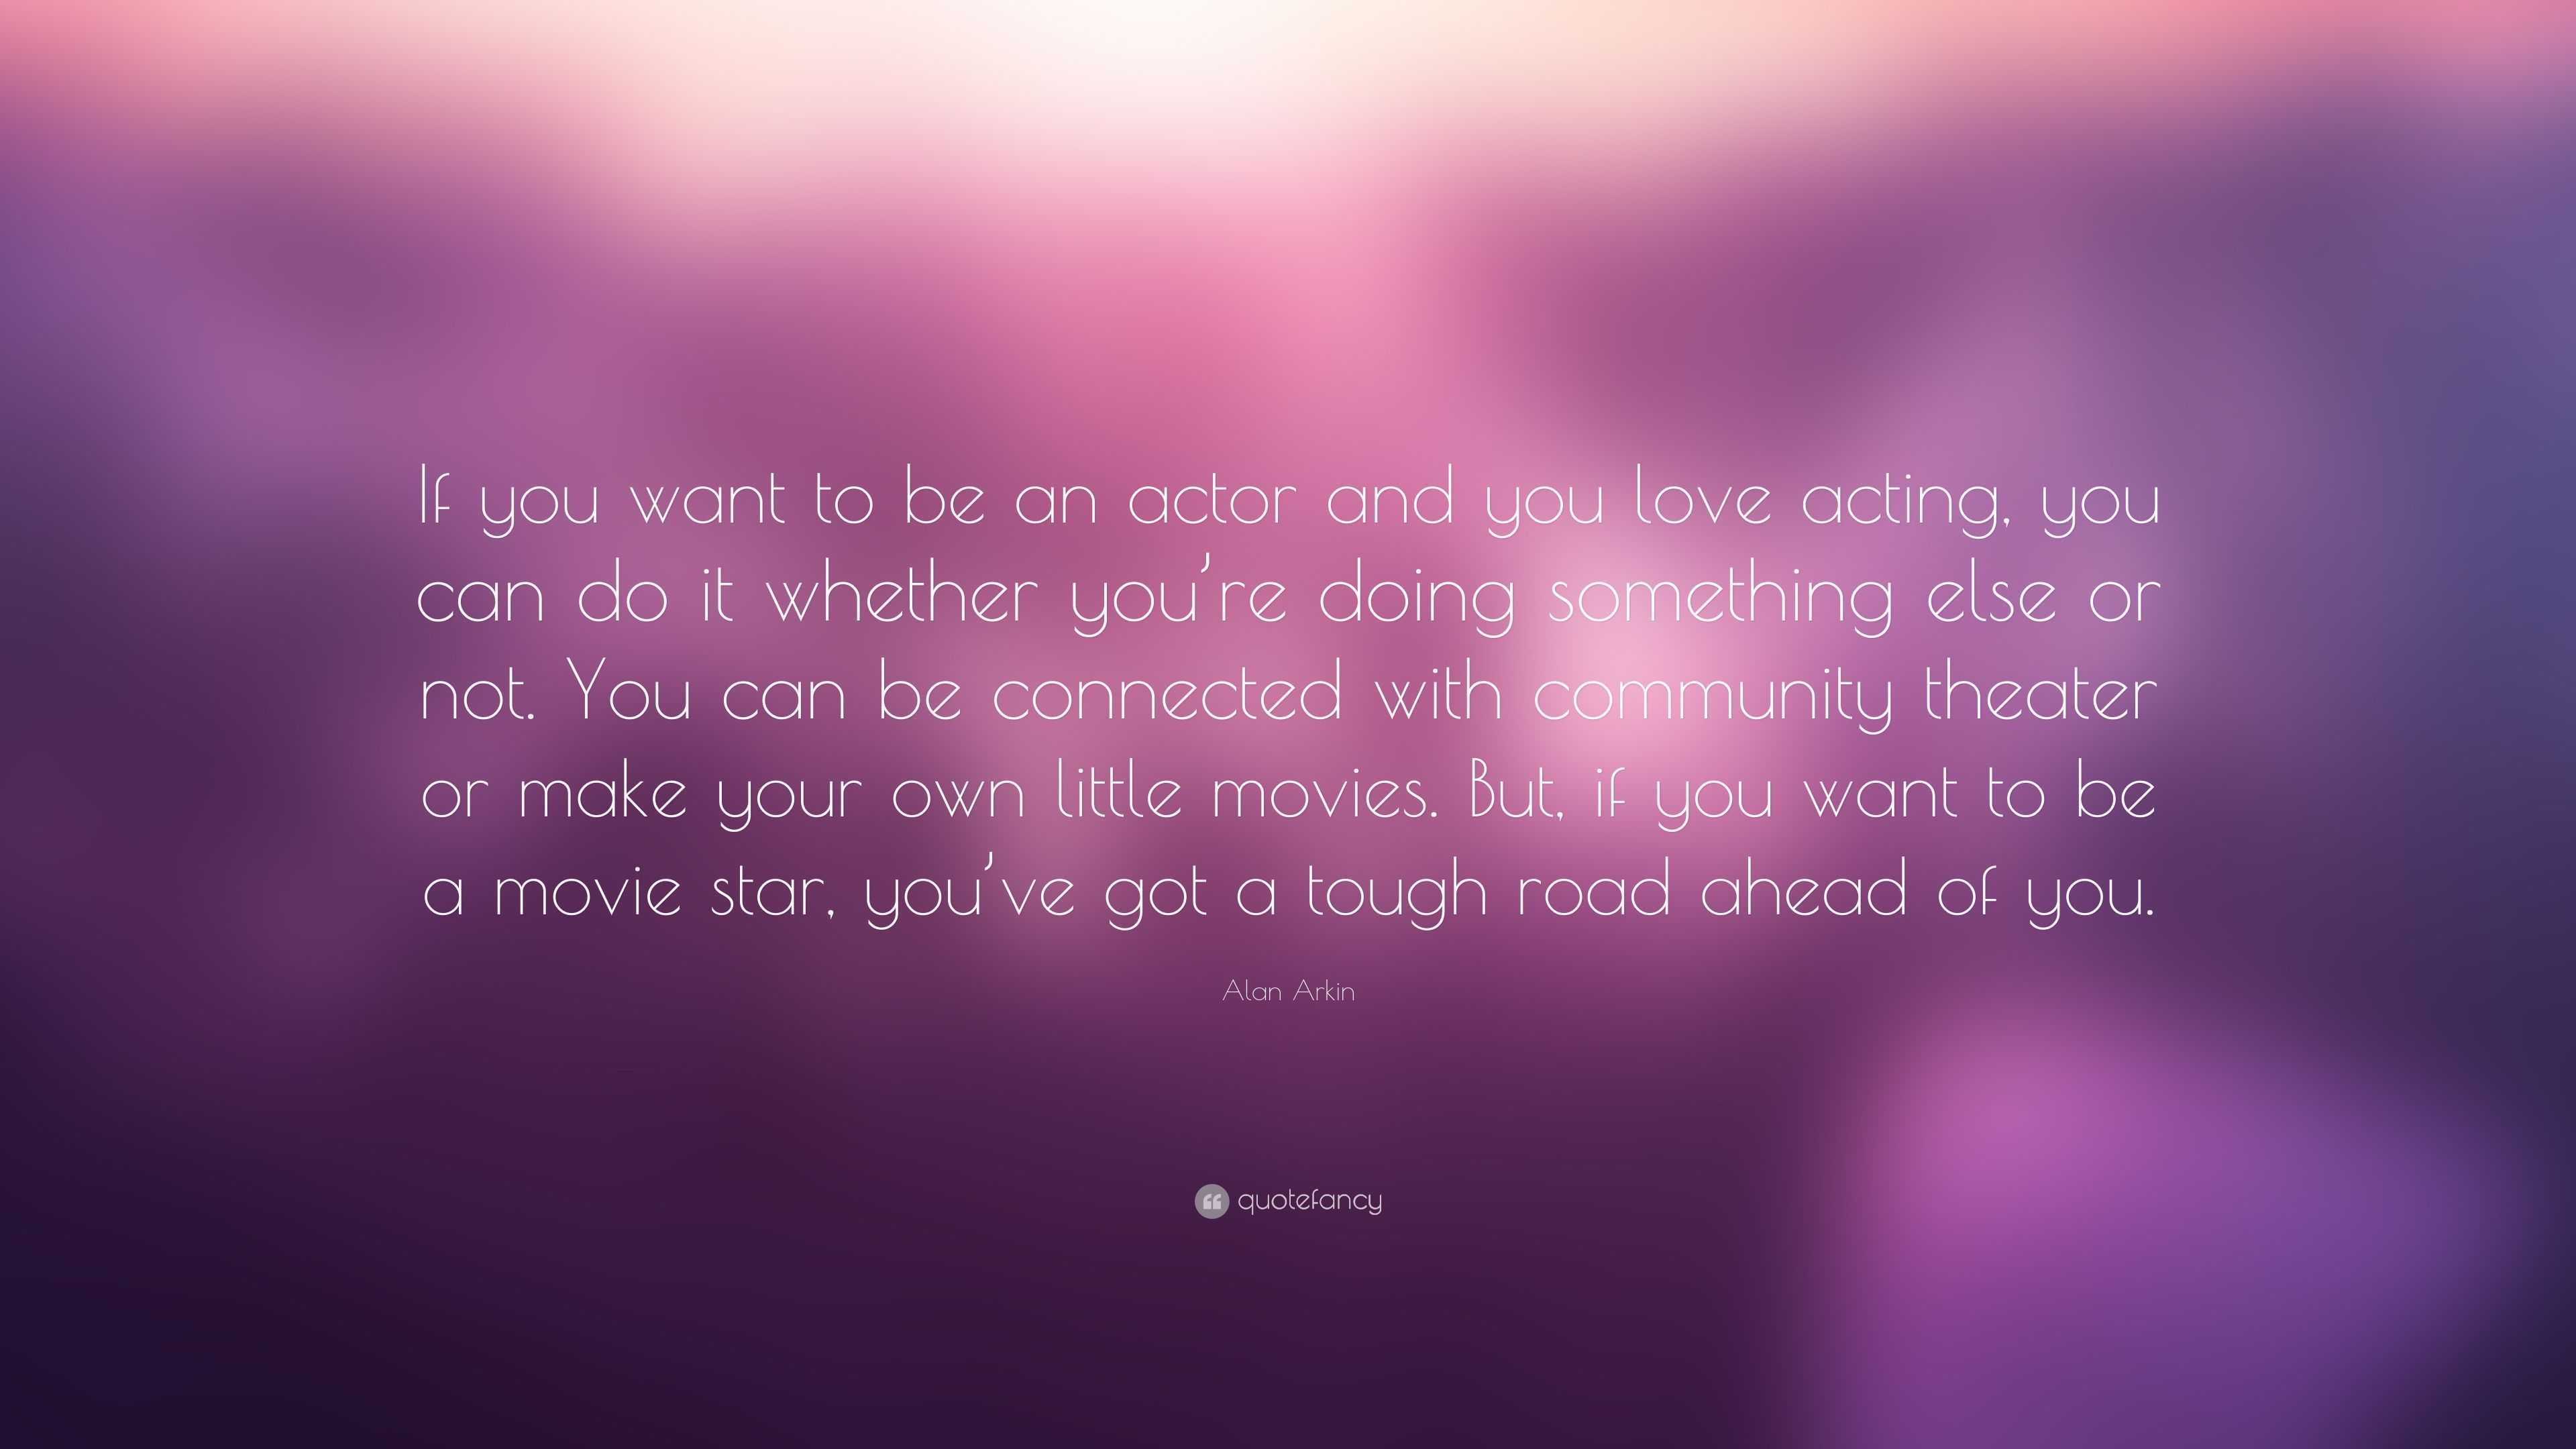 Alan Arkin Quote: “If you want to be an actor and you love acting, you ...